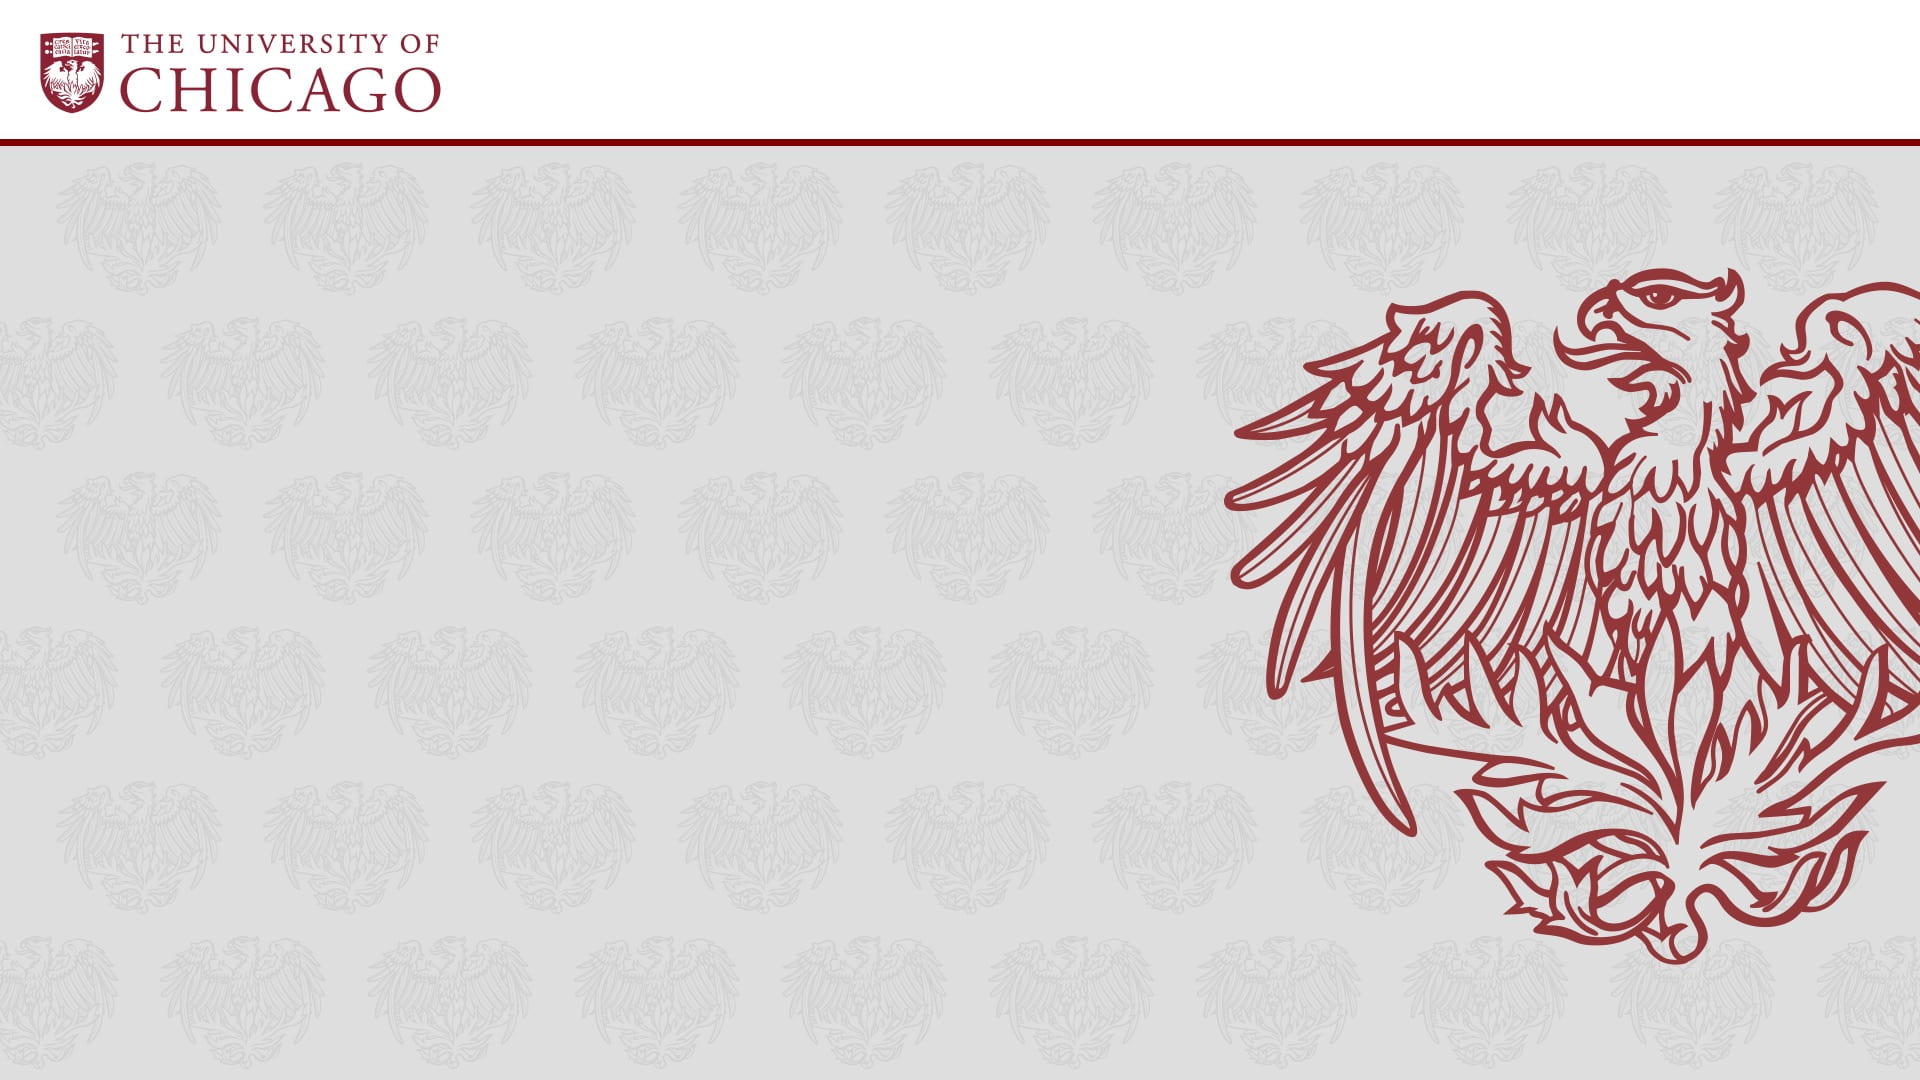 Maroon phoenix against a grey background with a smaller grey phoenix pattern